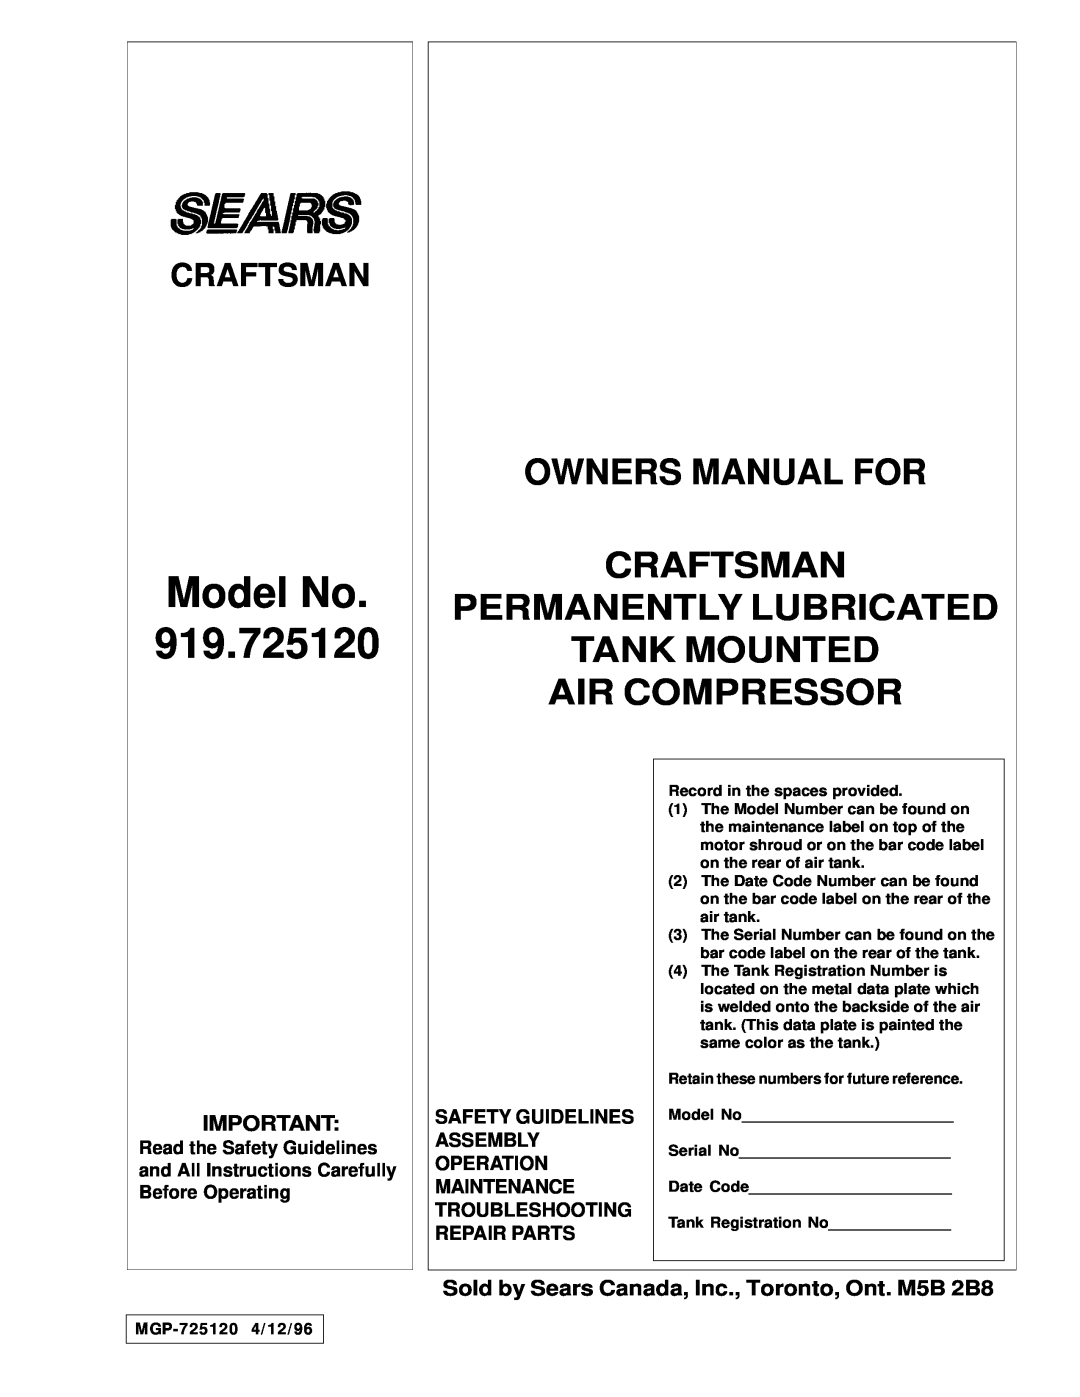 Sears 919.72512 owner manual Model No, Craftsman, Sold by Sears Canada, Inc., Toronto, Ont. M5B 2B8, Air Compressor 